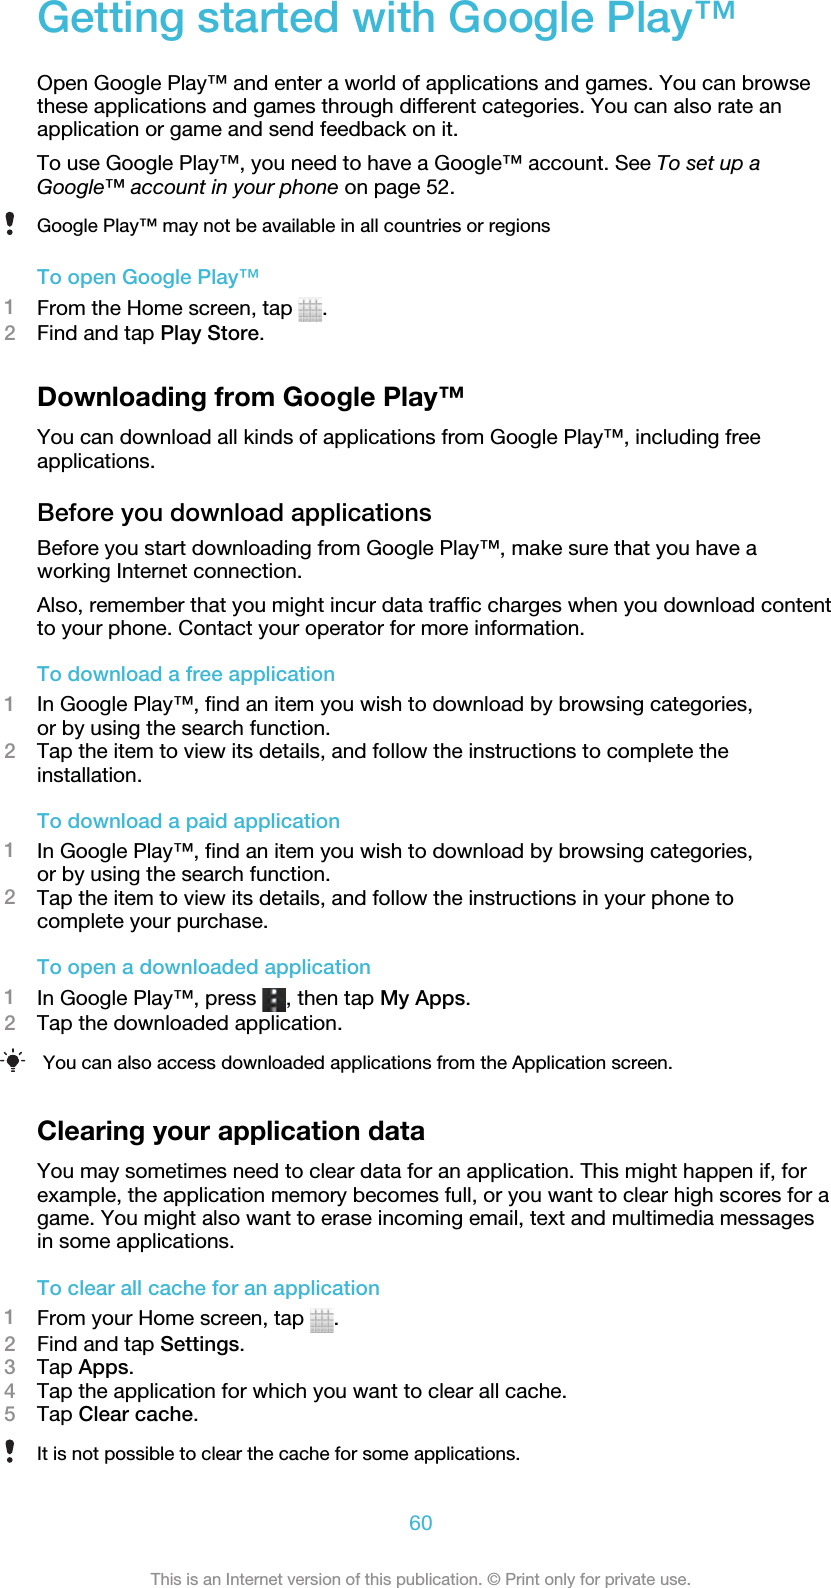 Getting started with Google Play™Open Google Play™ and enter a world of applications and games. You can browsethese applications and games through different categories. You can also rate anapplication or game and send feedback on it.To use Google Play™, you need to have a Google™ account. See To set up aGoogle™ account in your phone on page 52.Google Play™ may not be available in all countries or regionsTo open Google Play™1From the Home screen, tap  .2Find and tap Play Store.Downloading from Google Play™You can download all kinds of applications from Google Play™, including freeapplications.Before you download applicationsBefore you start downloading from Google Play™, make sure that you have aworking Internet connection.Also, remember that you might incur data traffic charges when you download contentto your phone. Contact your operator for more information.To download a free application1In Google Play™, find an item you wish to download by browsing categories,or by using the search function.2Tap the item to view its details, and follow the instructions to complete theinstallation.To download a paid application1In Google Play™, find an item you wish to download by browsing categories,or by using the search function.2Tap the item to view its details, and follow the instructions in your phone tocomplete your purchase.To open a downloaded application1In Google Play™, press  , then tap My Apps.2Tap the downloaded application.You can also access downloaded applications from the Application screen.Clearing your application dataYou may sometimes need to clear data for an application. This might happen if, forexample, the application memory becomes full, or you want to clear high scores for agame. You might also want to erase incoming email, text and multimedia messagesin some applications.To clear all cache for an application1From your Home screen, tap  .2Find and tap Settings.3Tap Apps.4Tap the application for which you want to clear all cache.5Tap Clear cache.It is not possible to clear the cache for some applications.60This is an Internet version of this publication. © Print only for private use.